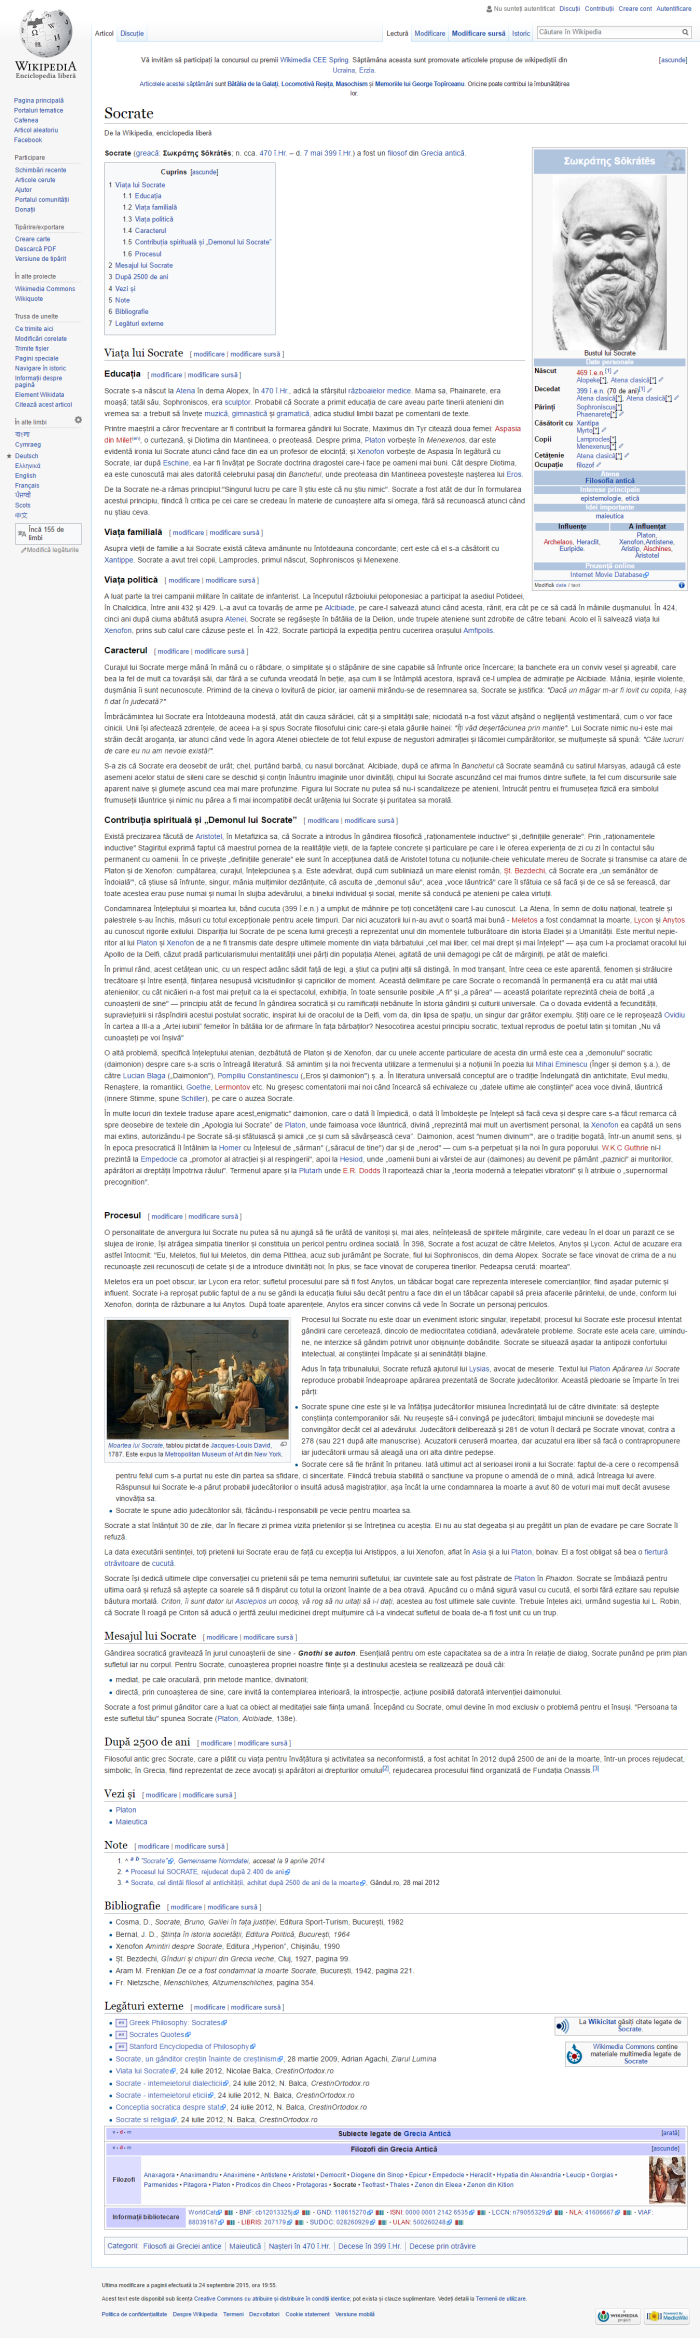 Socrate   Wikipedia.png